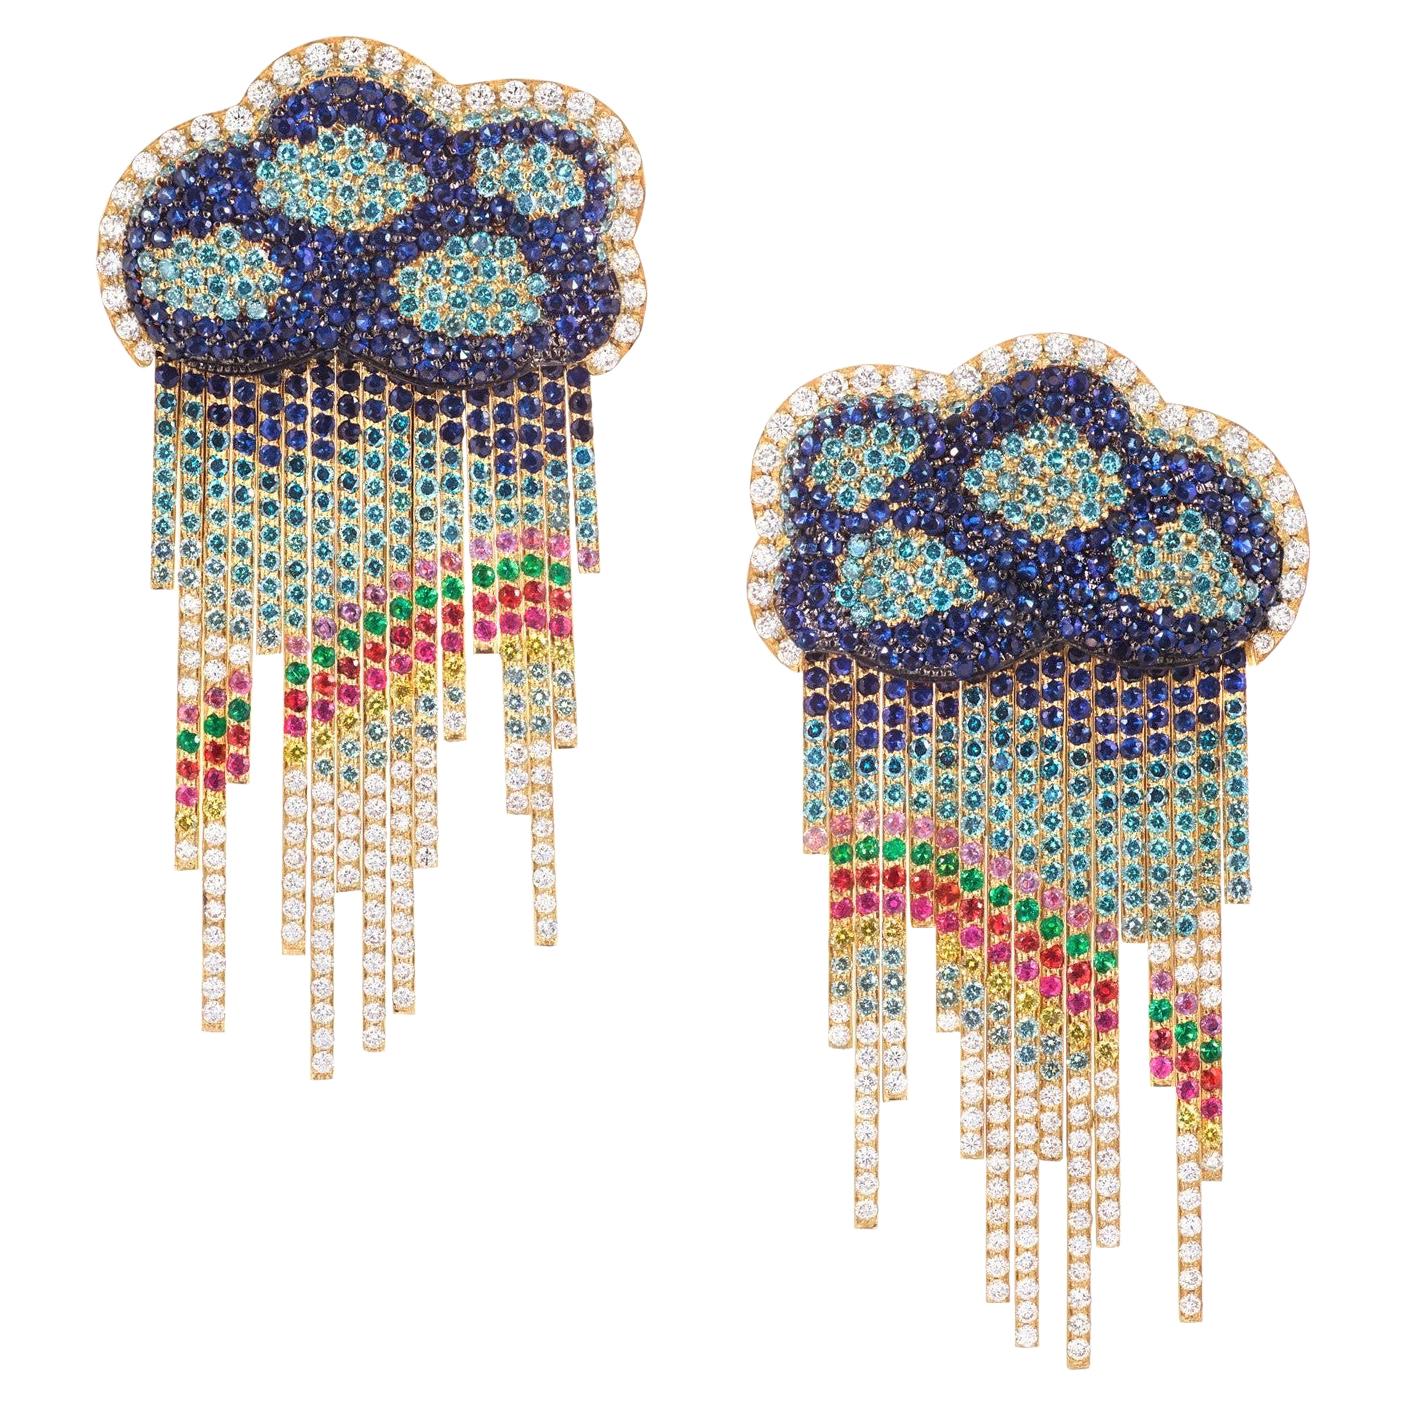 Rosior one-off earrings in Yellow Gold, Diamonds, Sapphires and Emeralds